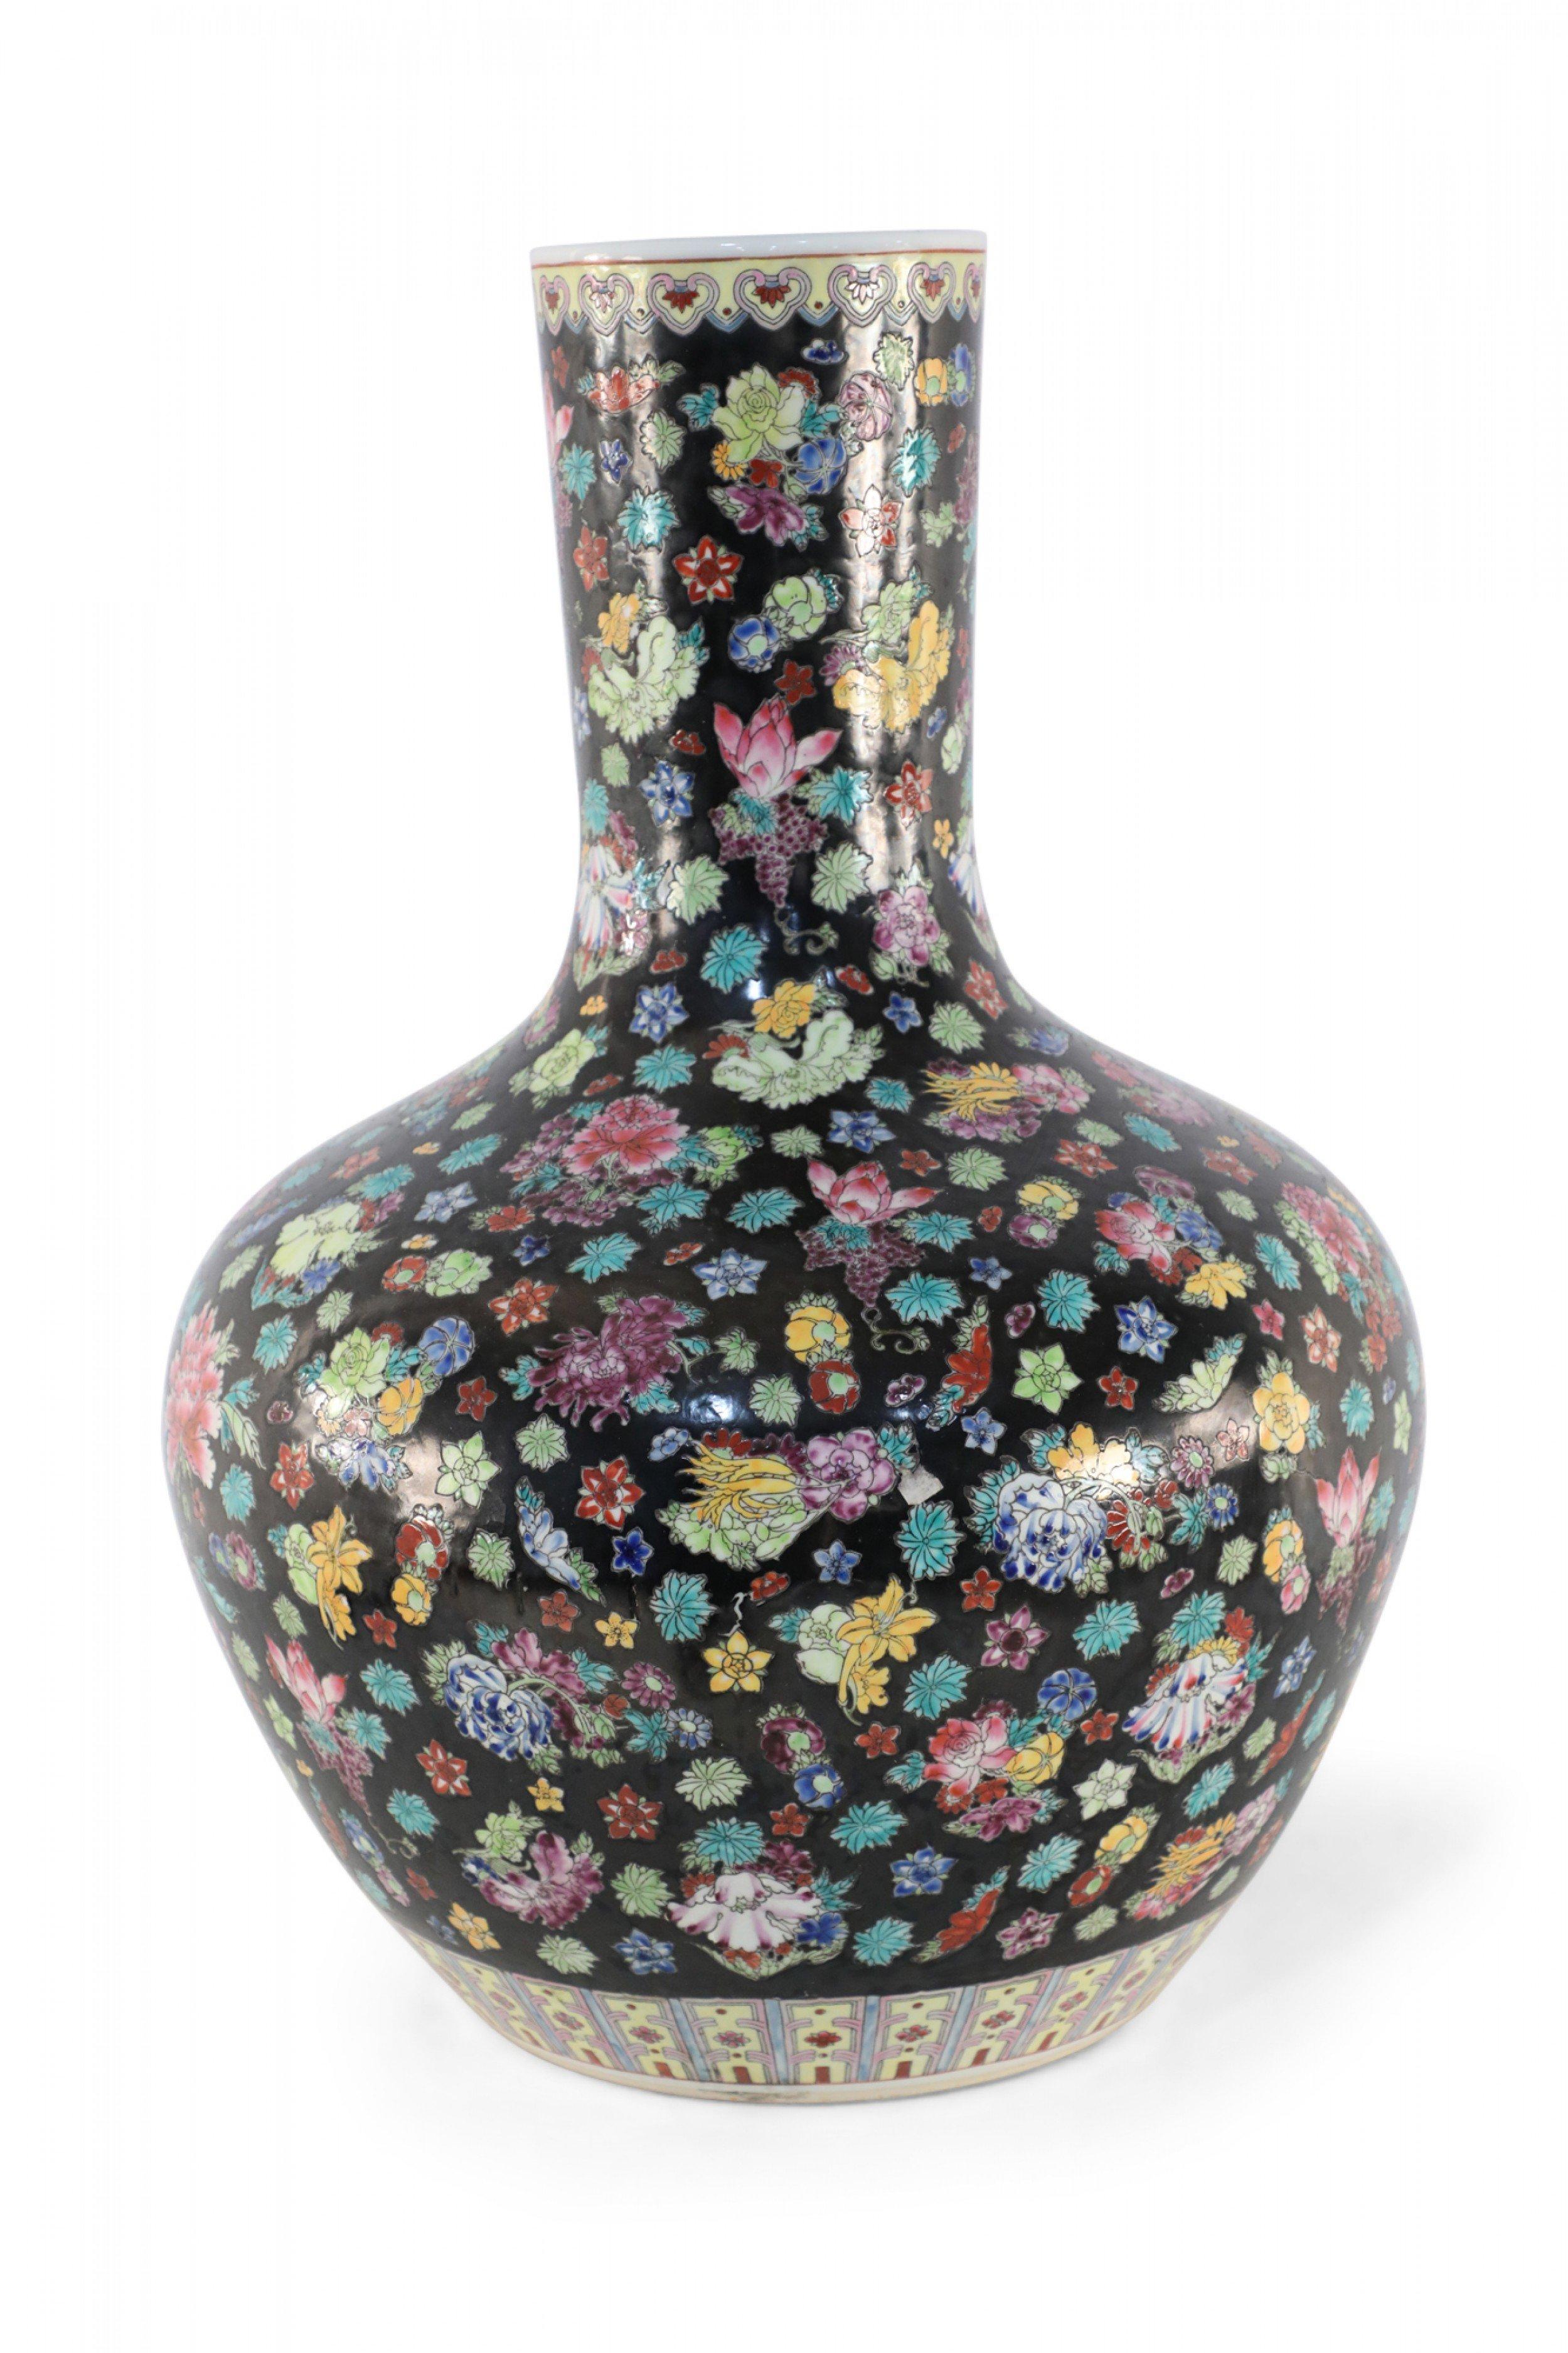 Chinese black porcelain vase decorated with an abundance of flowers varying in size, shape and color and two patterned bands around the top and base.
 